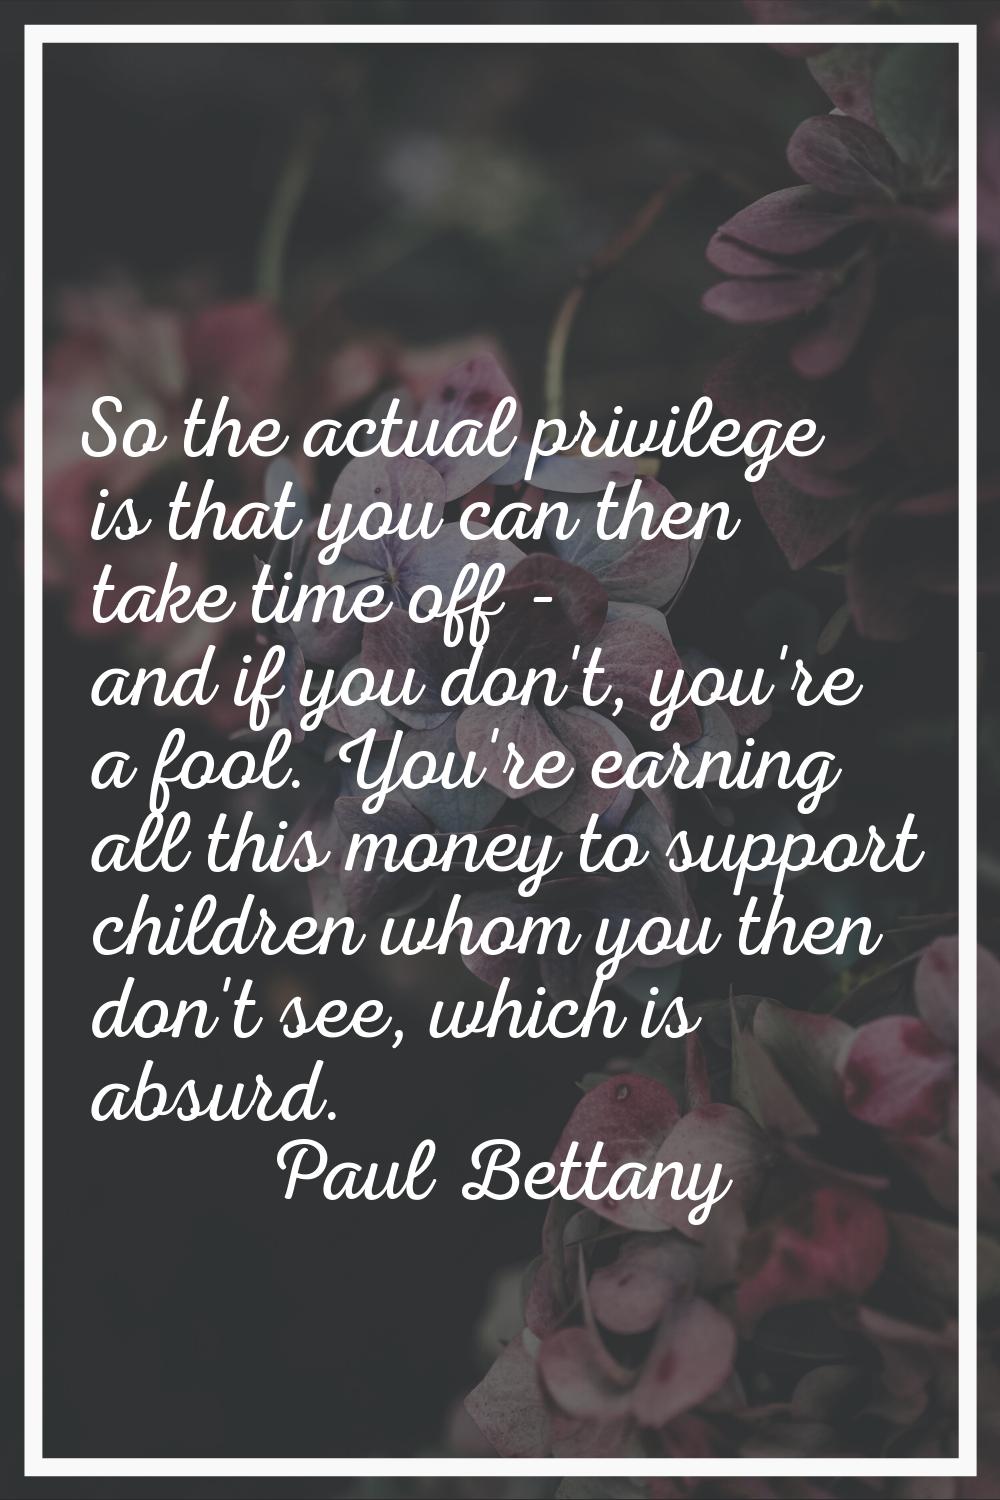 So the actual privilege is that you can then take time off - and if you don't, you're a fool. You'r